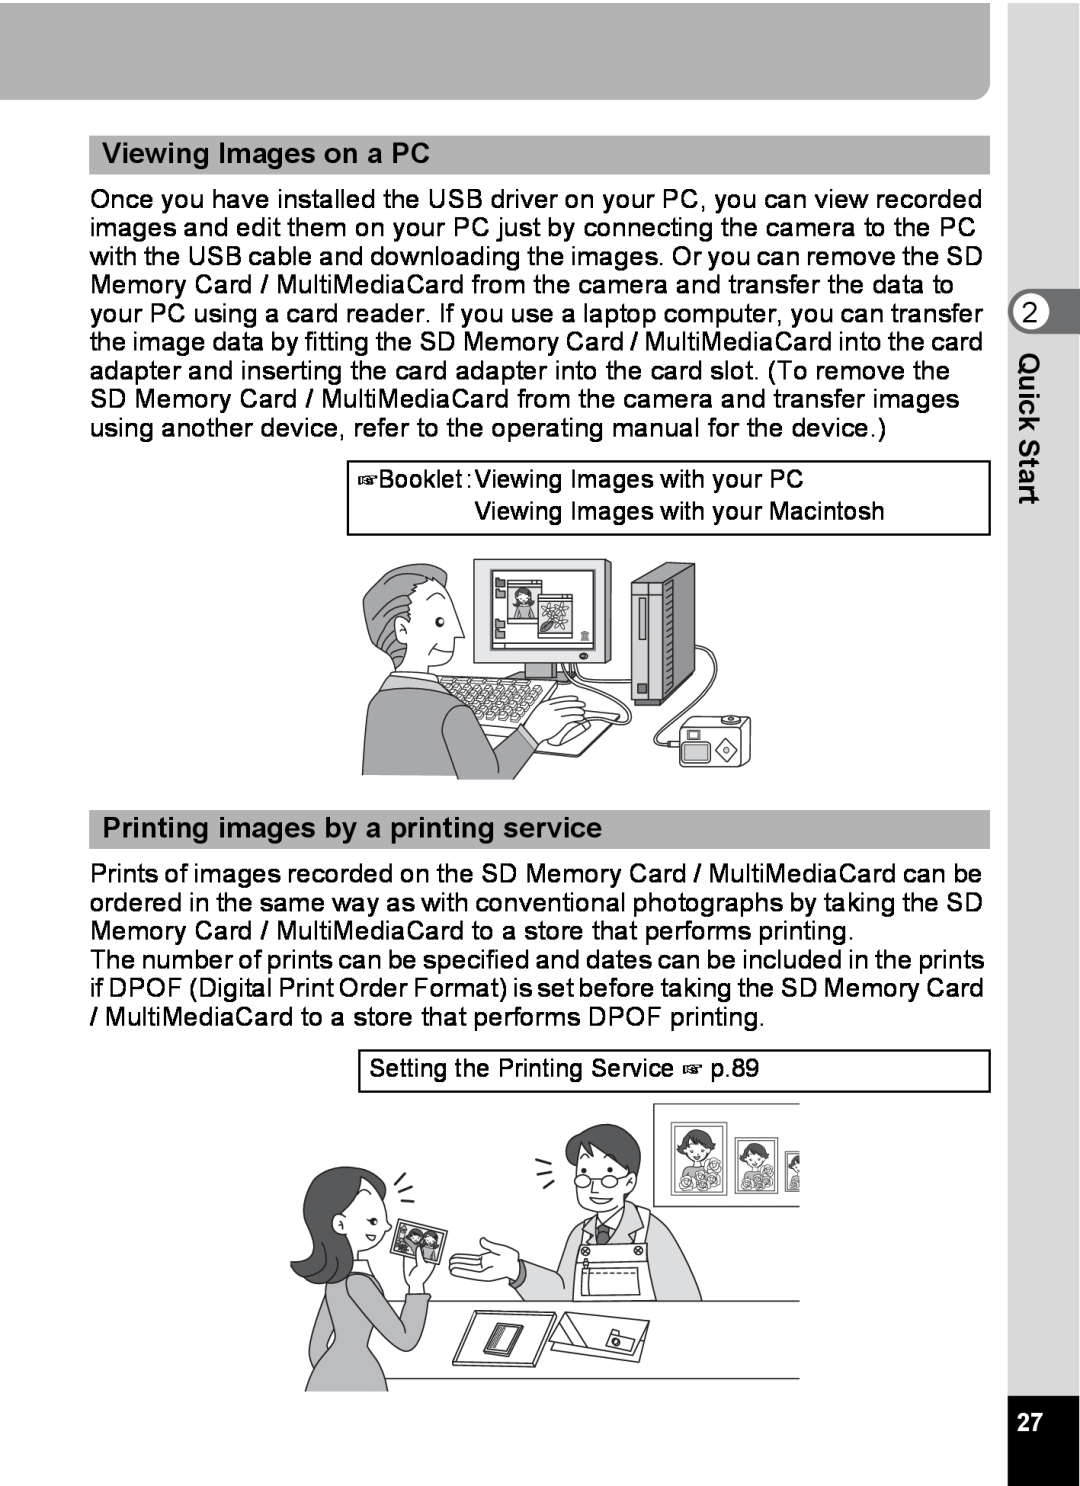 Pentax S4 manual Viewing Images on a PC, Printing images by a printing service 